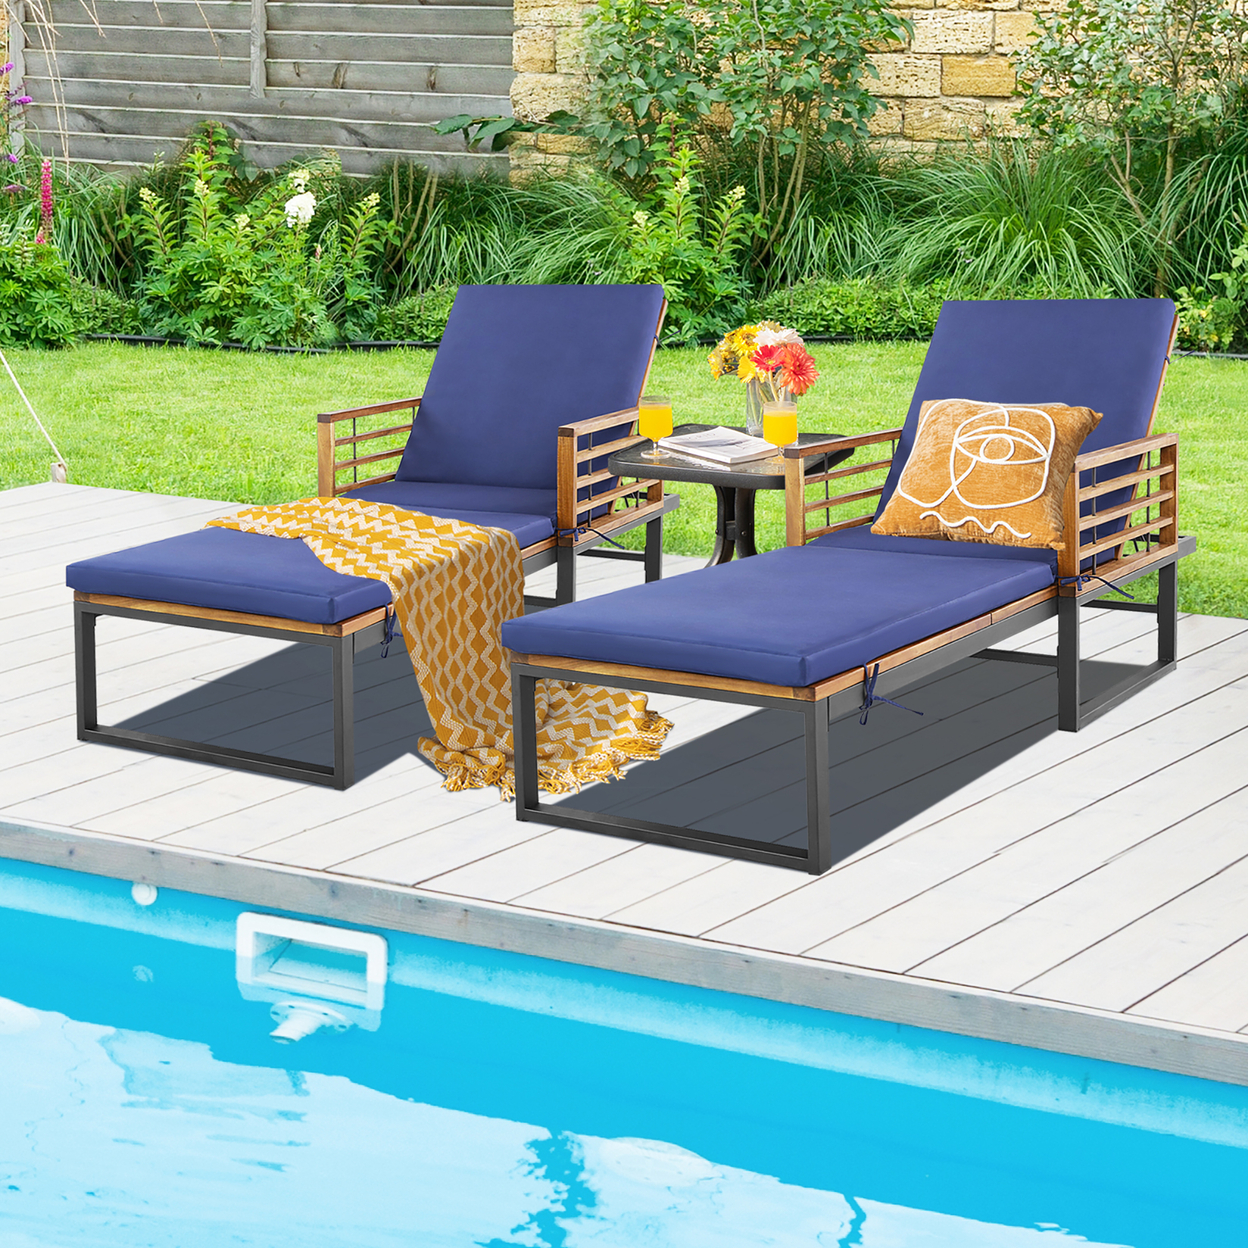 2 Pieces Outdoor Chaise Lounge Chair W/ 4-Position Adjustable Backrest Backyard Poolside